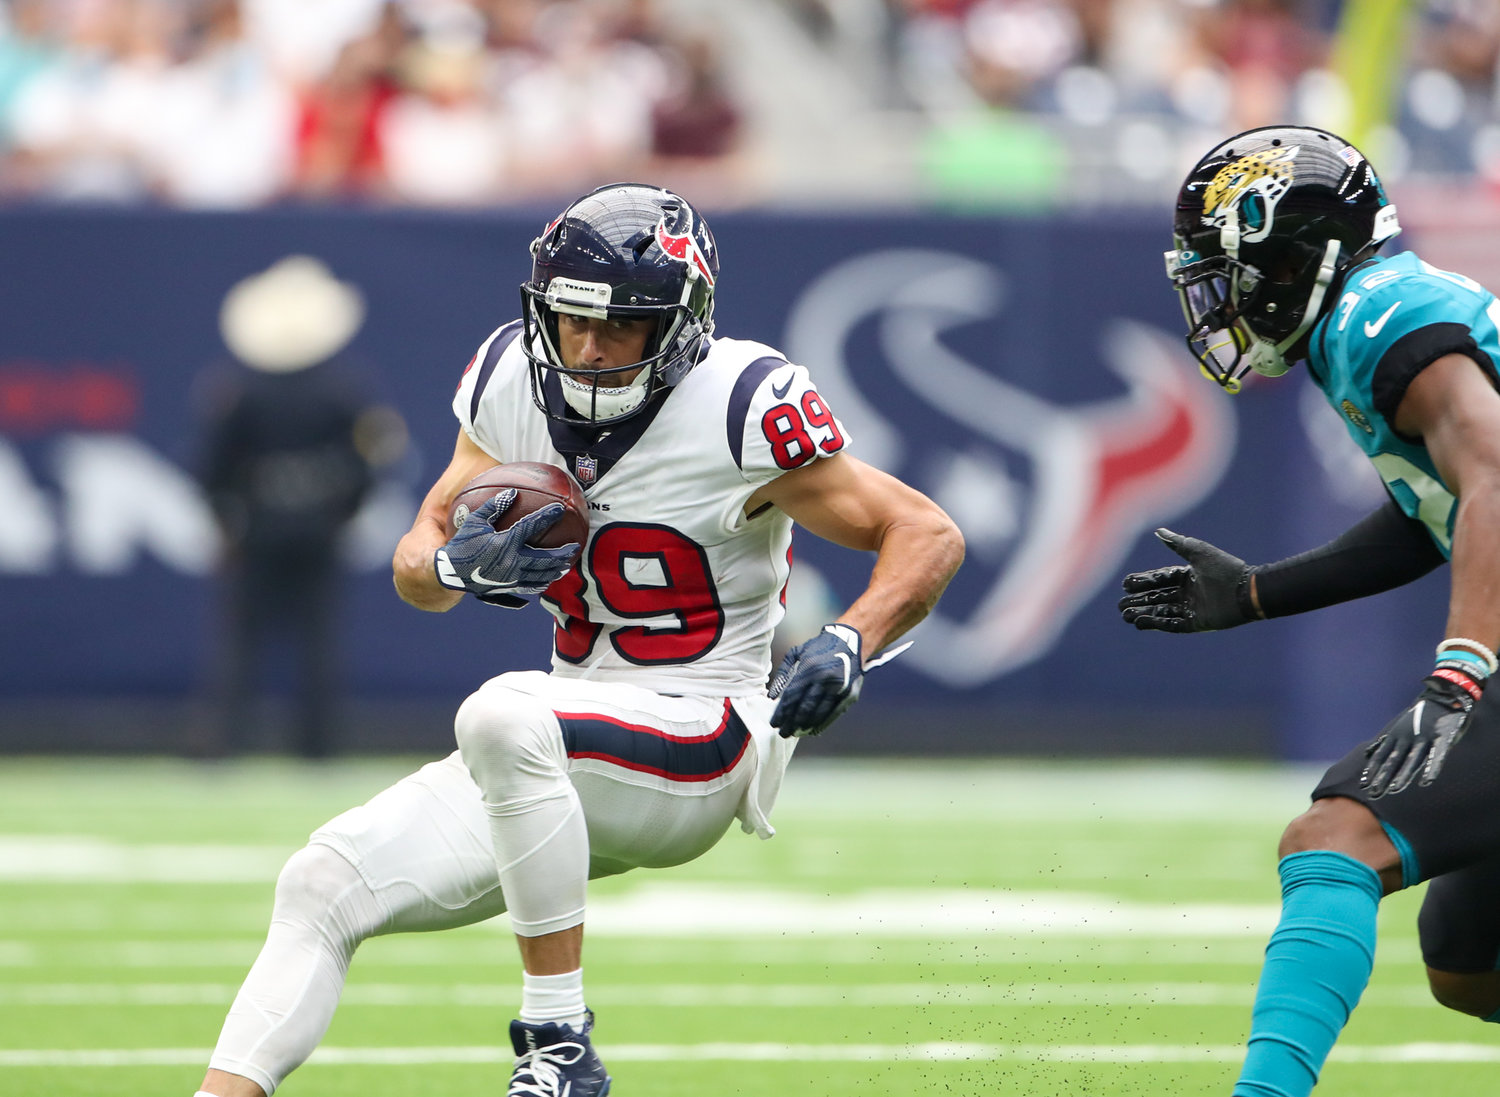 Houston Texans wide receiver Danny Amendola (89) carries the ball after a catch during the first half of an NFL game between the Houston Texans and the Jacksonville Jaguars on September 12, 2021 in Houston, Texas.